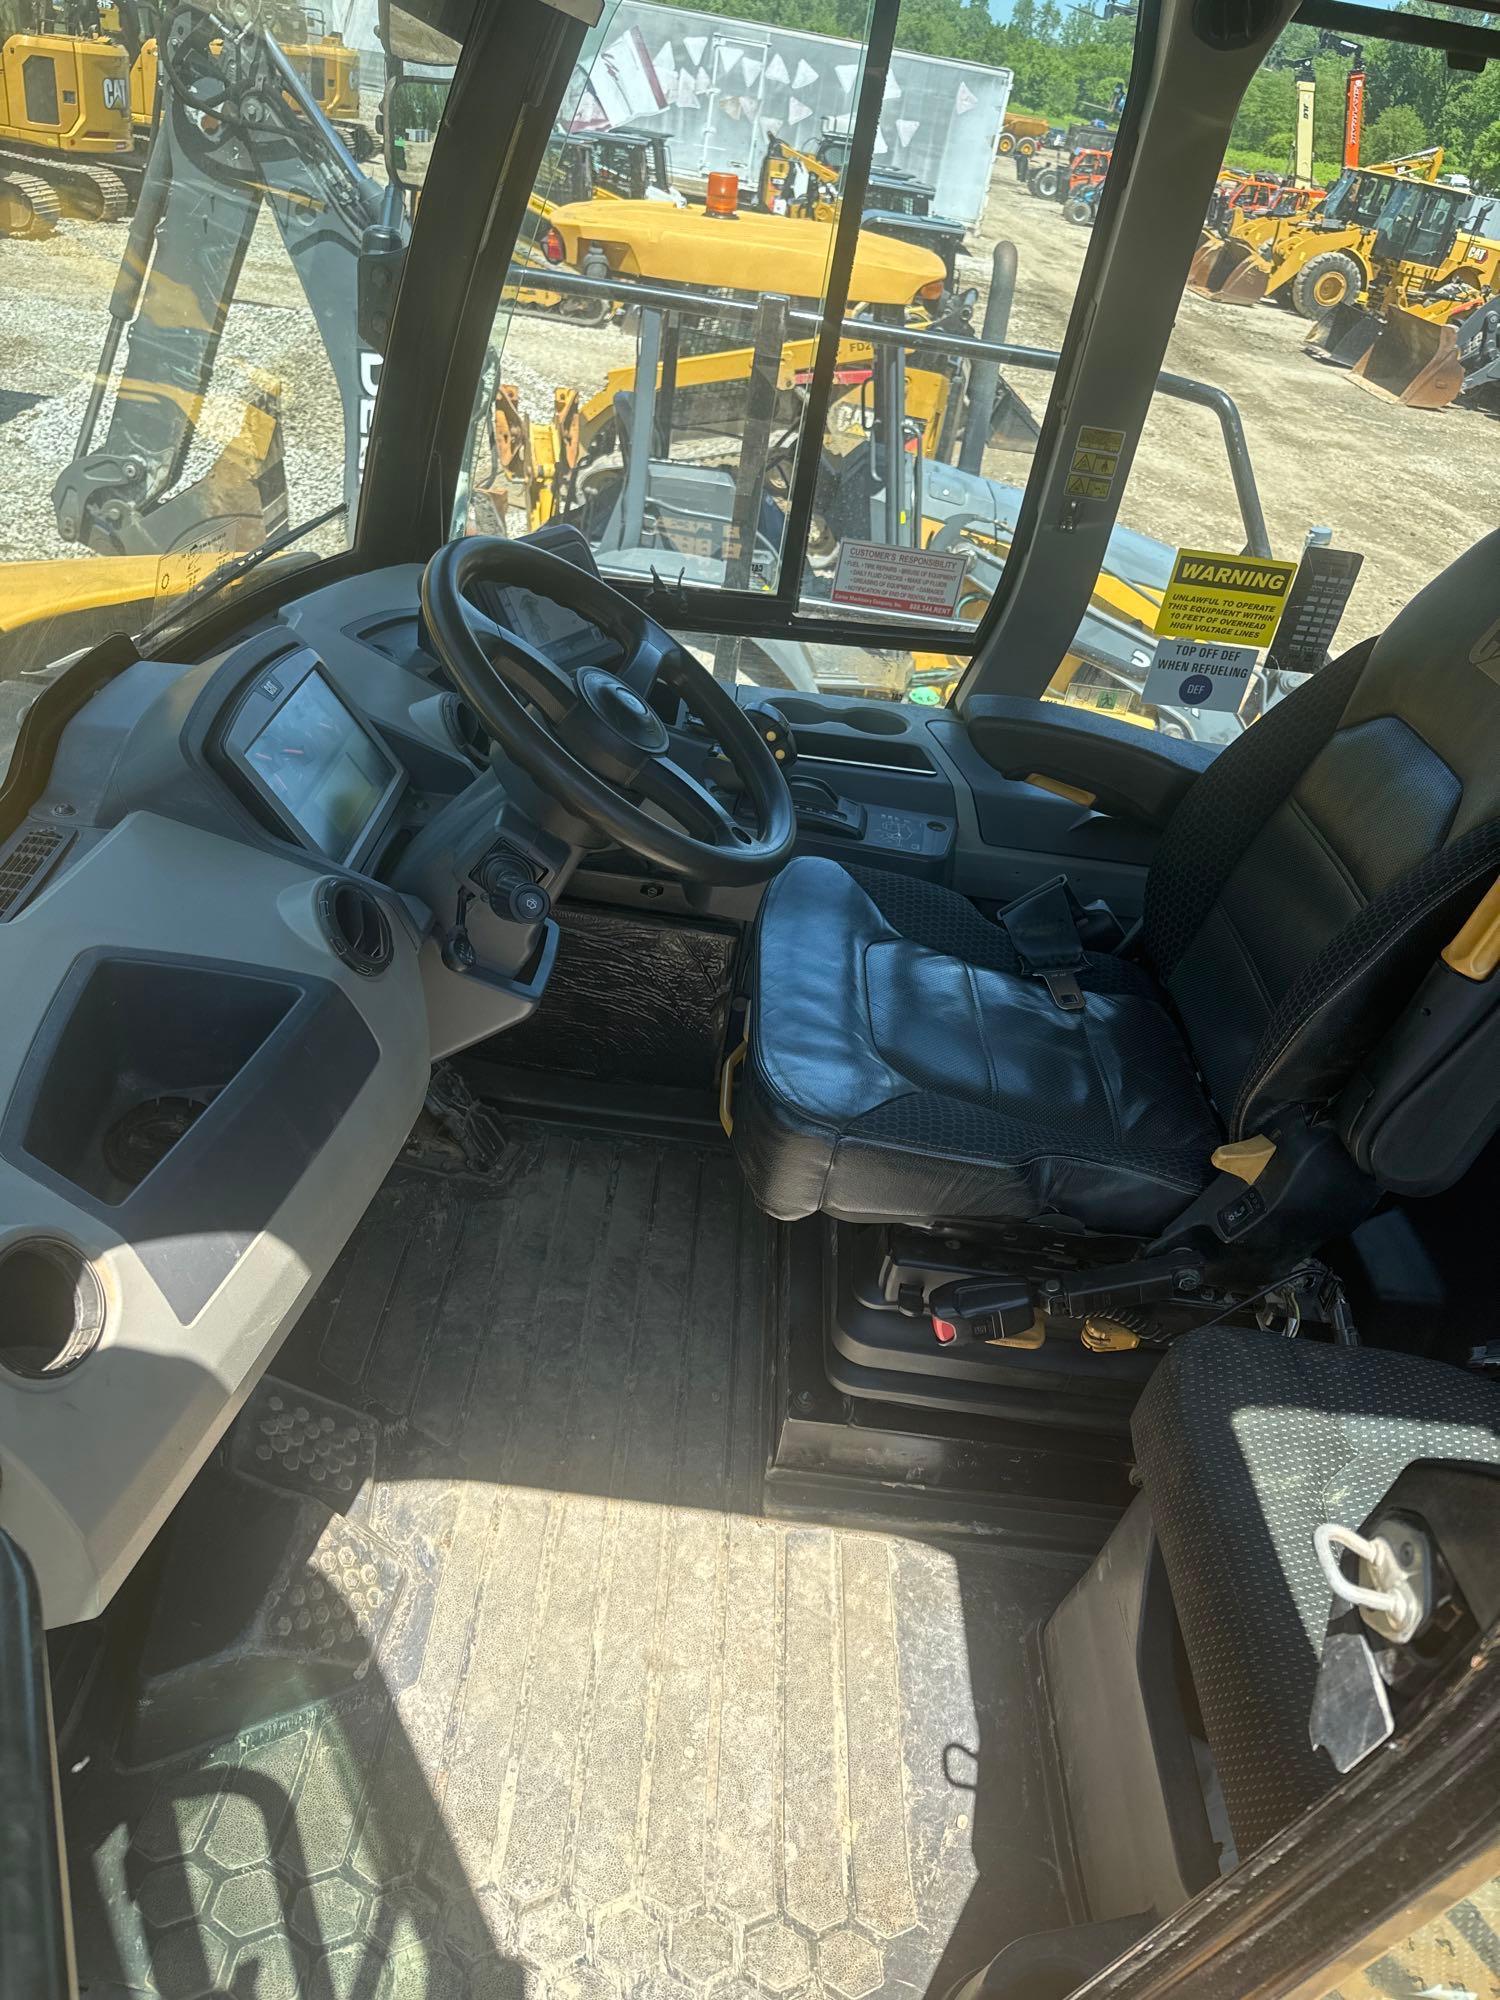 2018 CAT 745 ARTICULATED HAUL TRUCK SN:3T600388 6x6, powered by Cat C18 diesel engine, equipped with